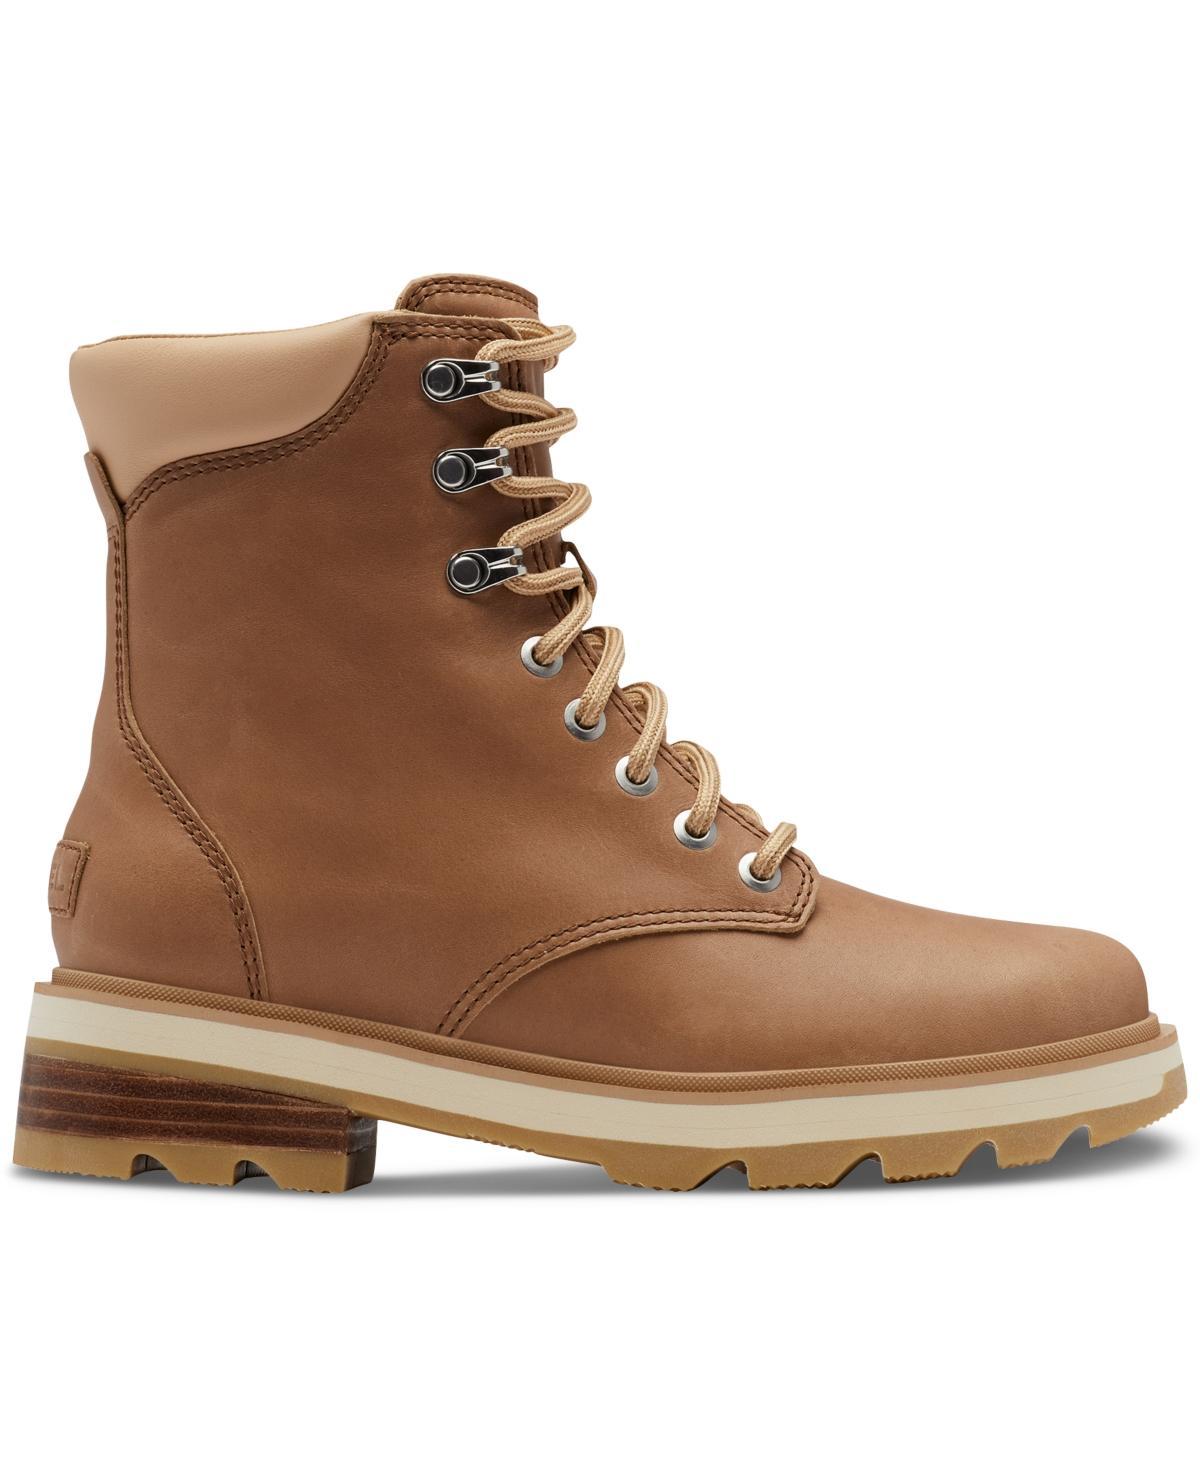 SOREL Lennox Waterproof Lace-Up Boot Product Image